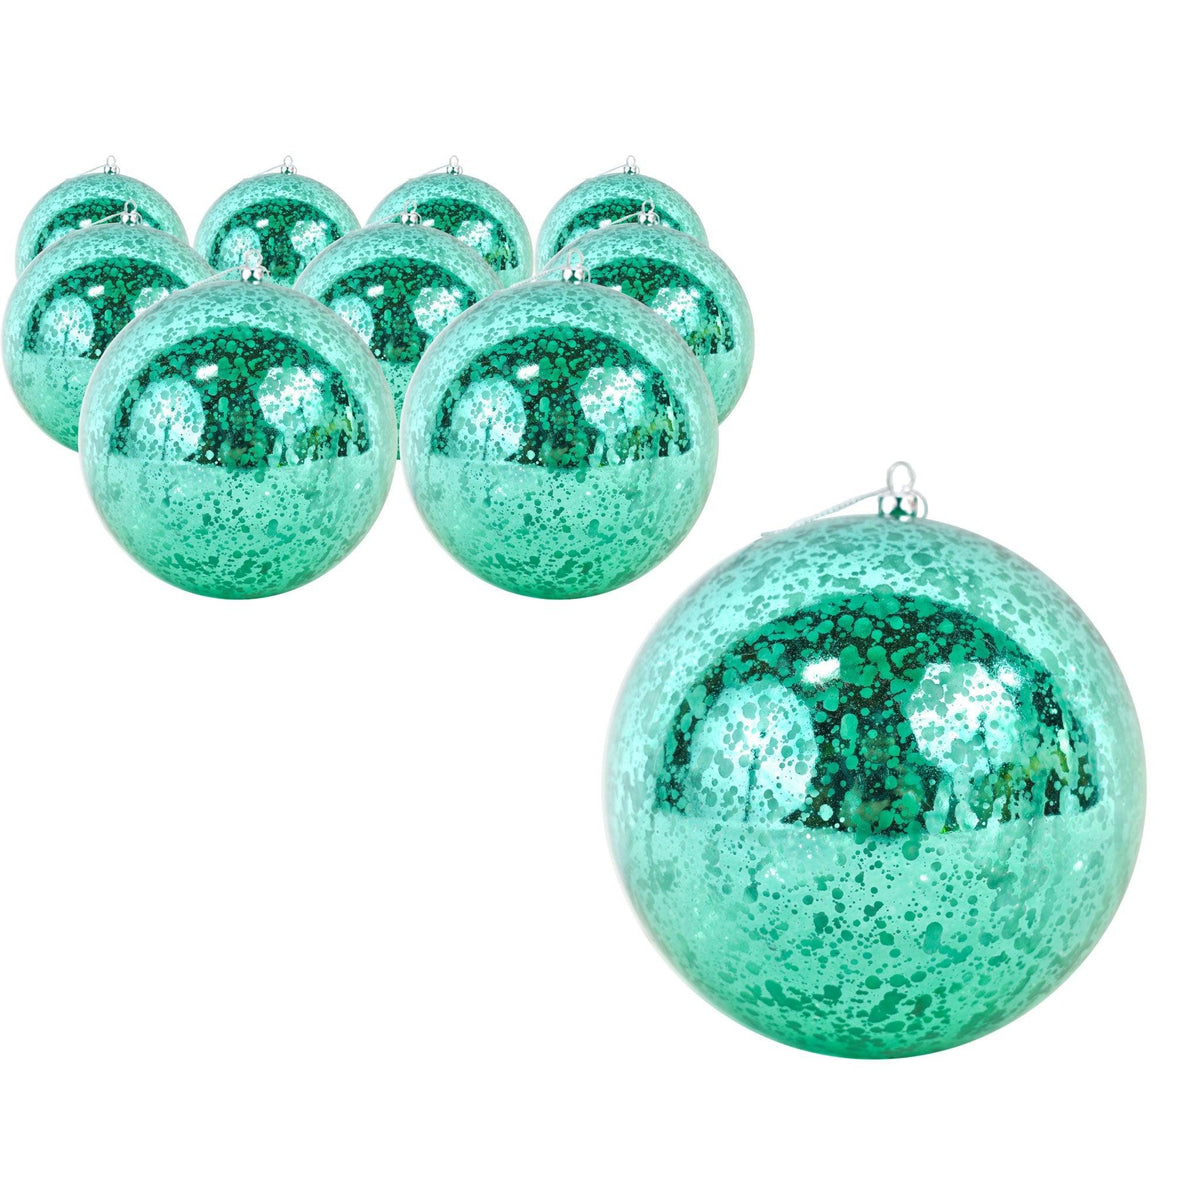 Lee Display offers brand new Shiny Fuscia Sequin Green Plastic Ball Ornaments at wholesale prices for affordable Christmas Tree Hanging and Holiday Decorating on sale at leedisplay.com